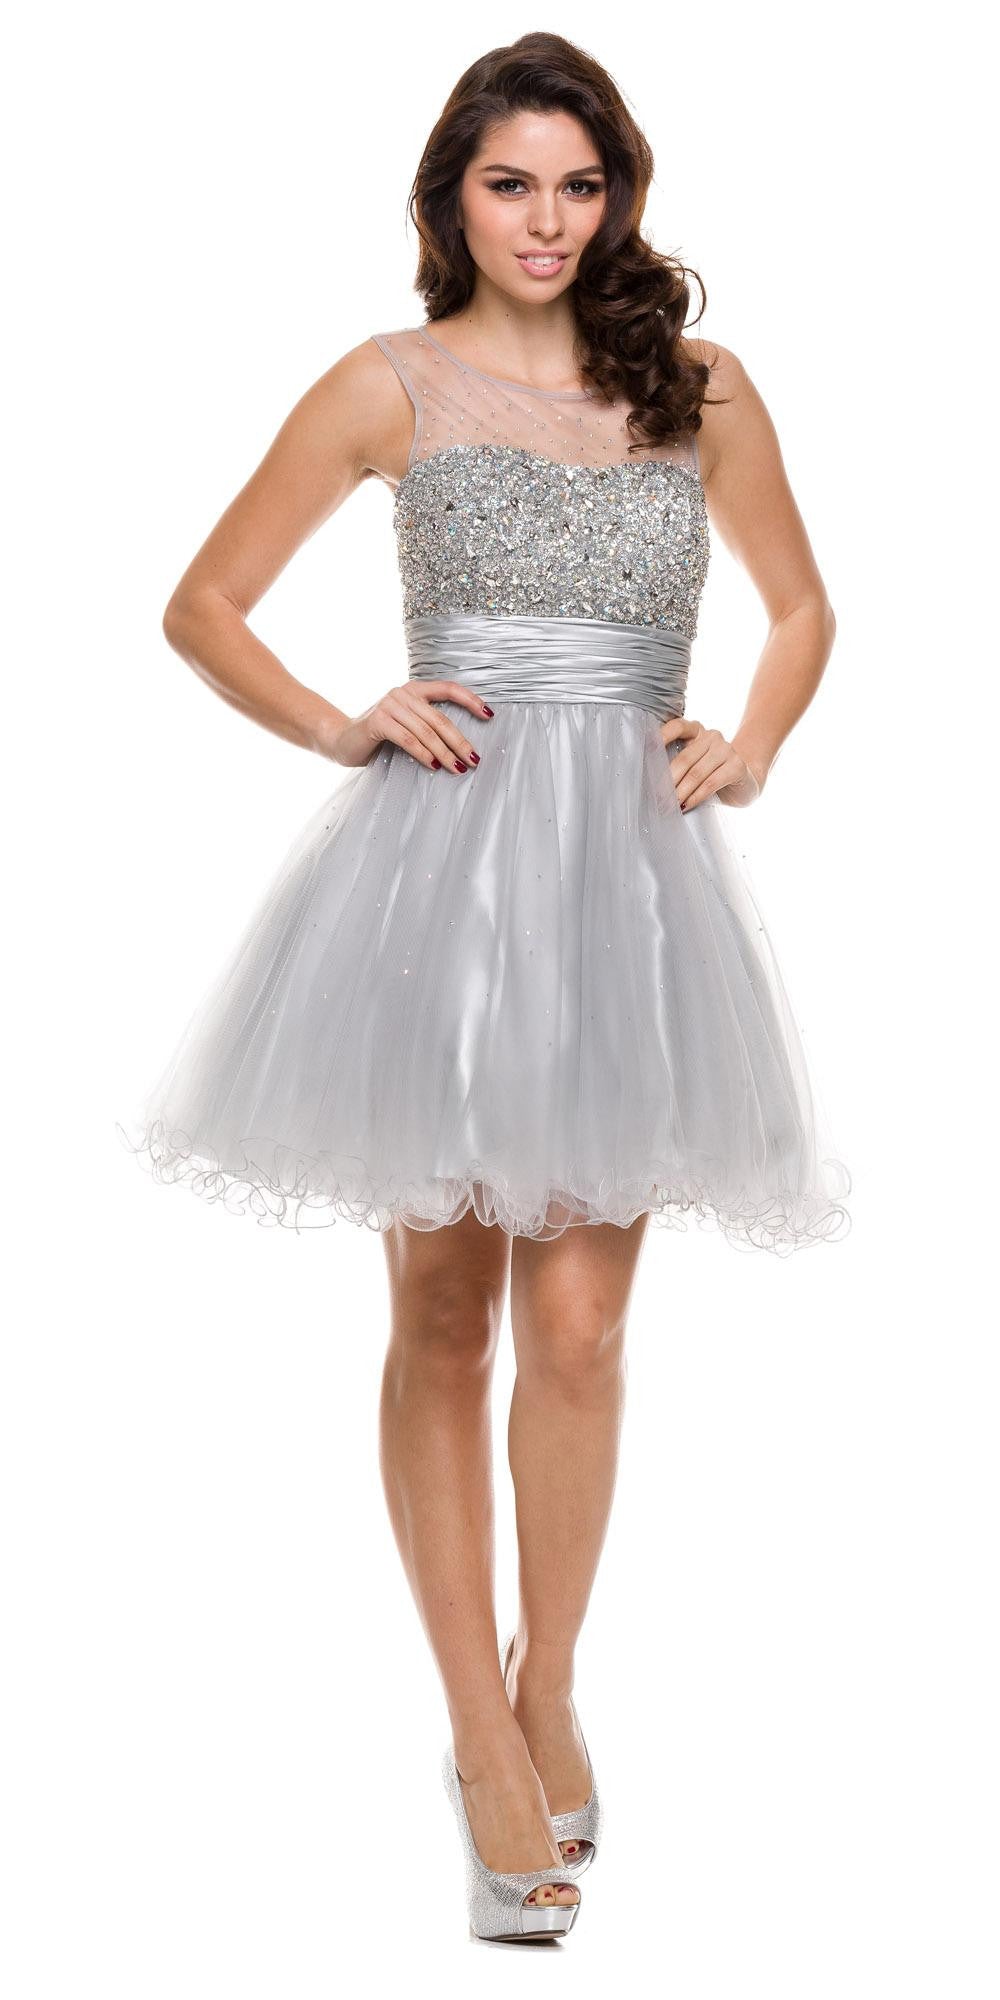 Ruched Empire Waist Illusion Neck Puffy Silver Prom Dress